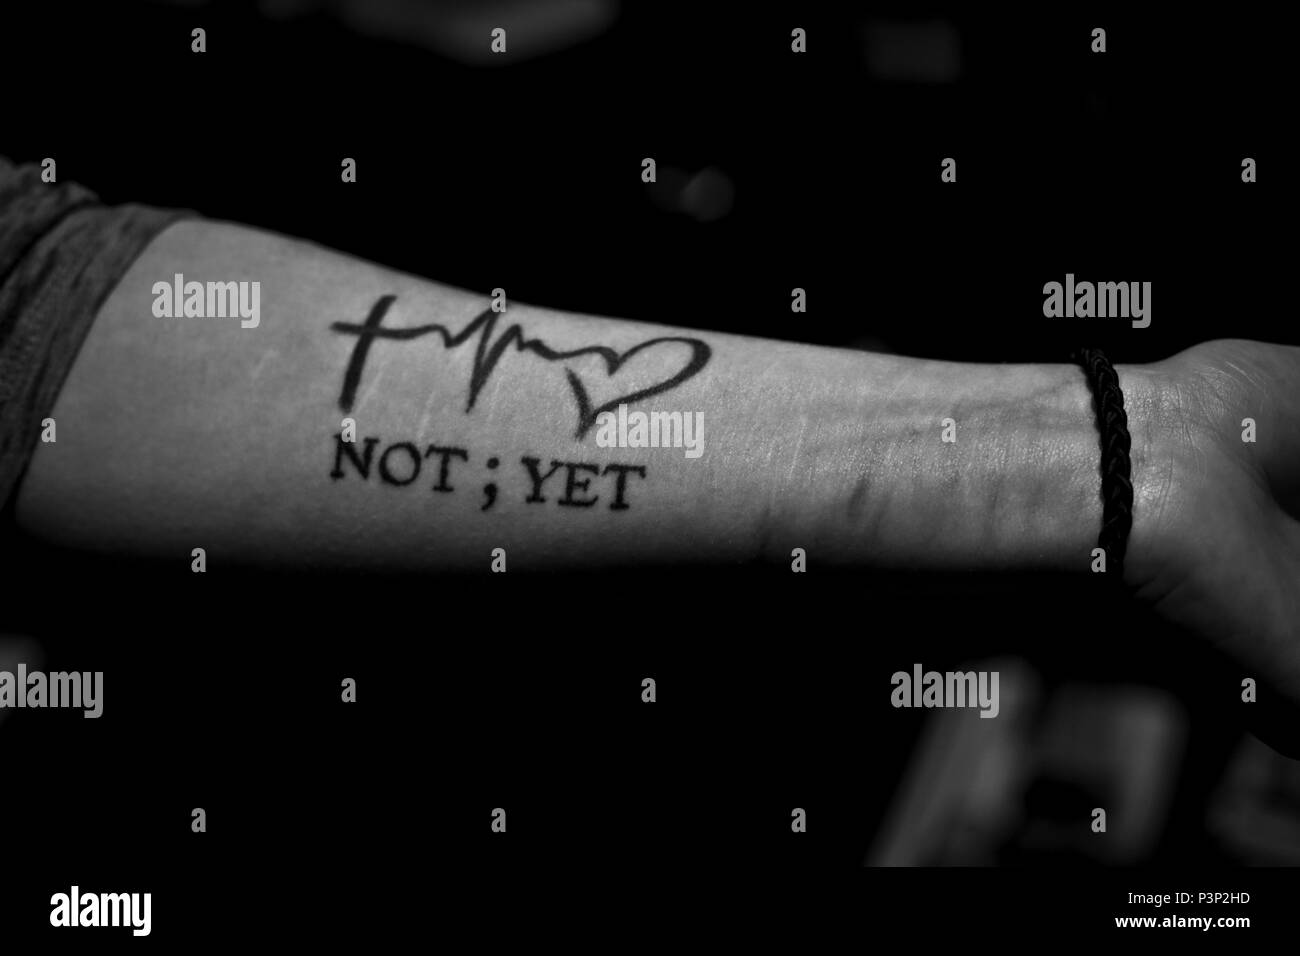 Rachel Miller, 30, holds up her scarred arm and anti-suicide tattoo, July 19, 2016. Miller has suffered for years from mental health issues, and had attempted suicide in the past. She and her boyfriend Matt Nichol are both on disability, and live in a small one bedroom apartment in Cortland, N.Y. Nearly one in three residents of Cortland are at or below the poverty line. Miller and Nichol attended the Healthy Cortland Innovative Readiness Training event aimed at Cortland residents, which included military service members providing no cost medical, dental, optometry, and veterinary care. (U.S.  Stock Photo